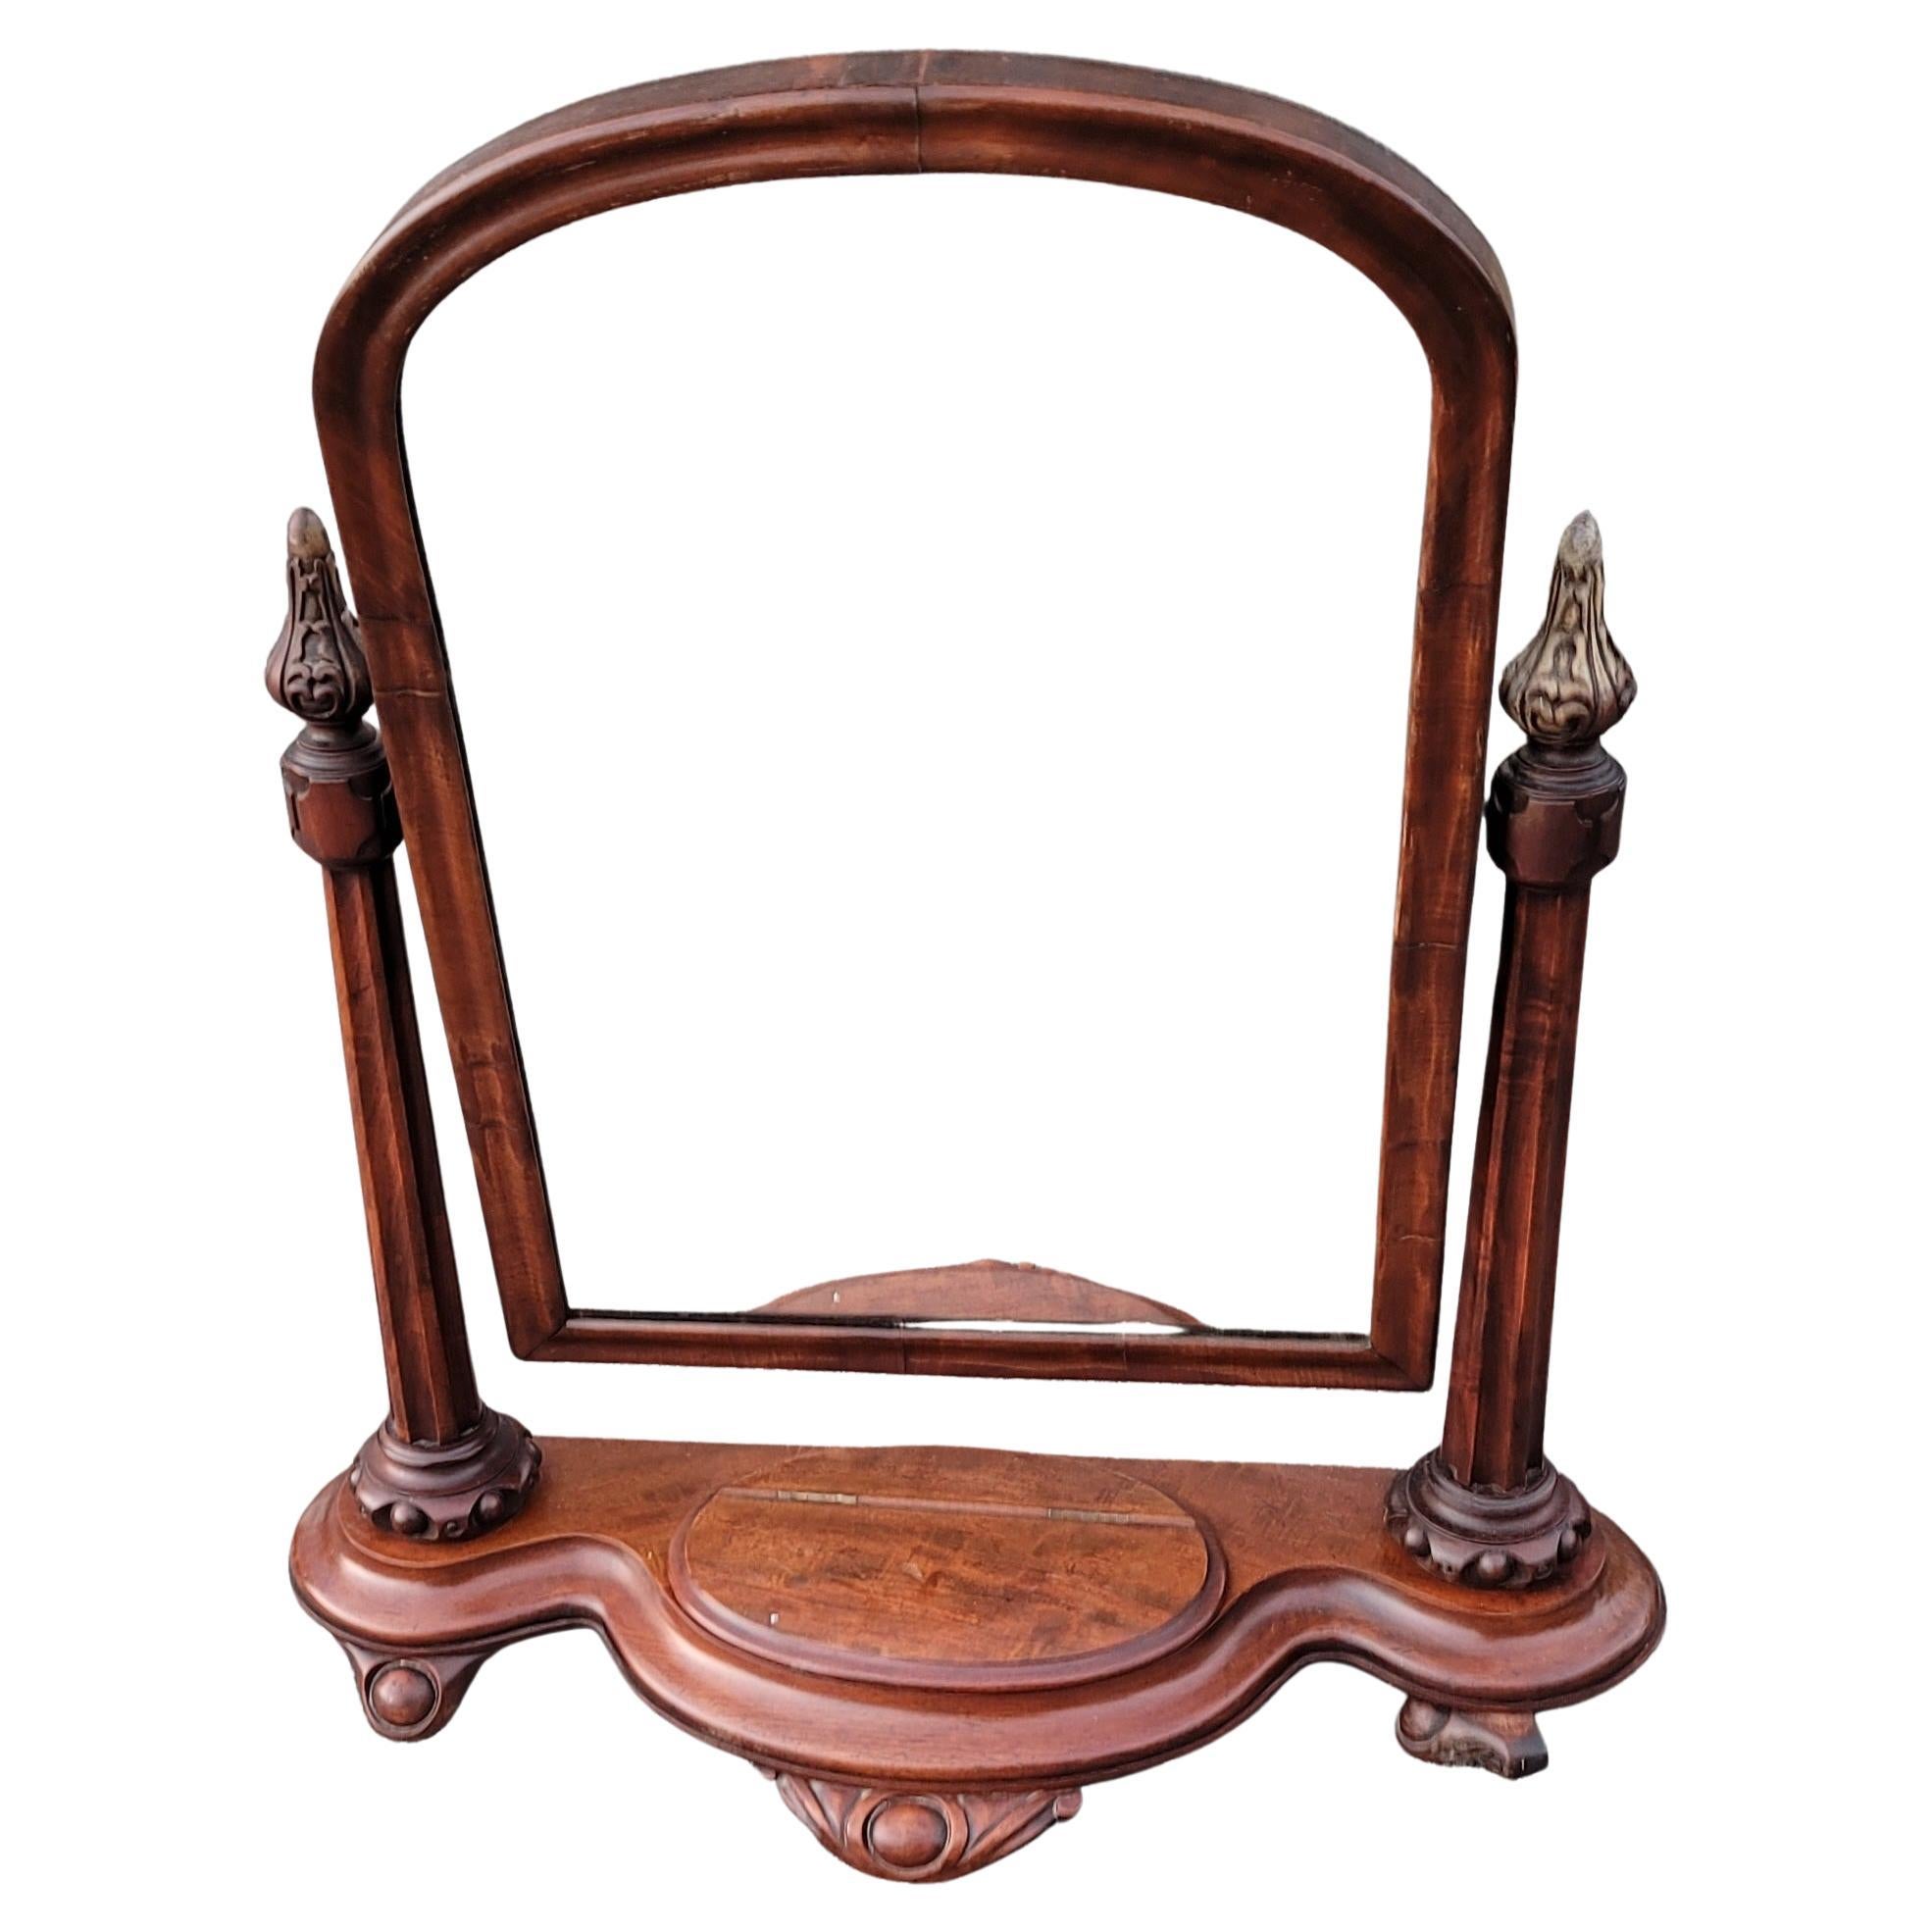 19th Century American Empire Mahogany Gentleman's Shaving or Dressing Mirror In Good Condition For Sale In Germantown, MD